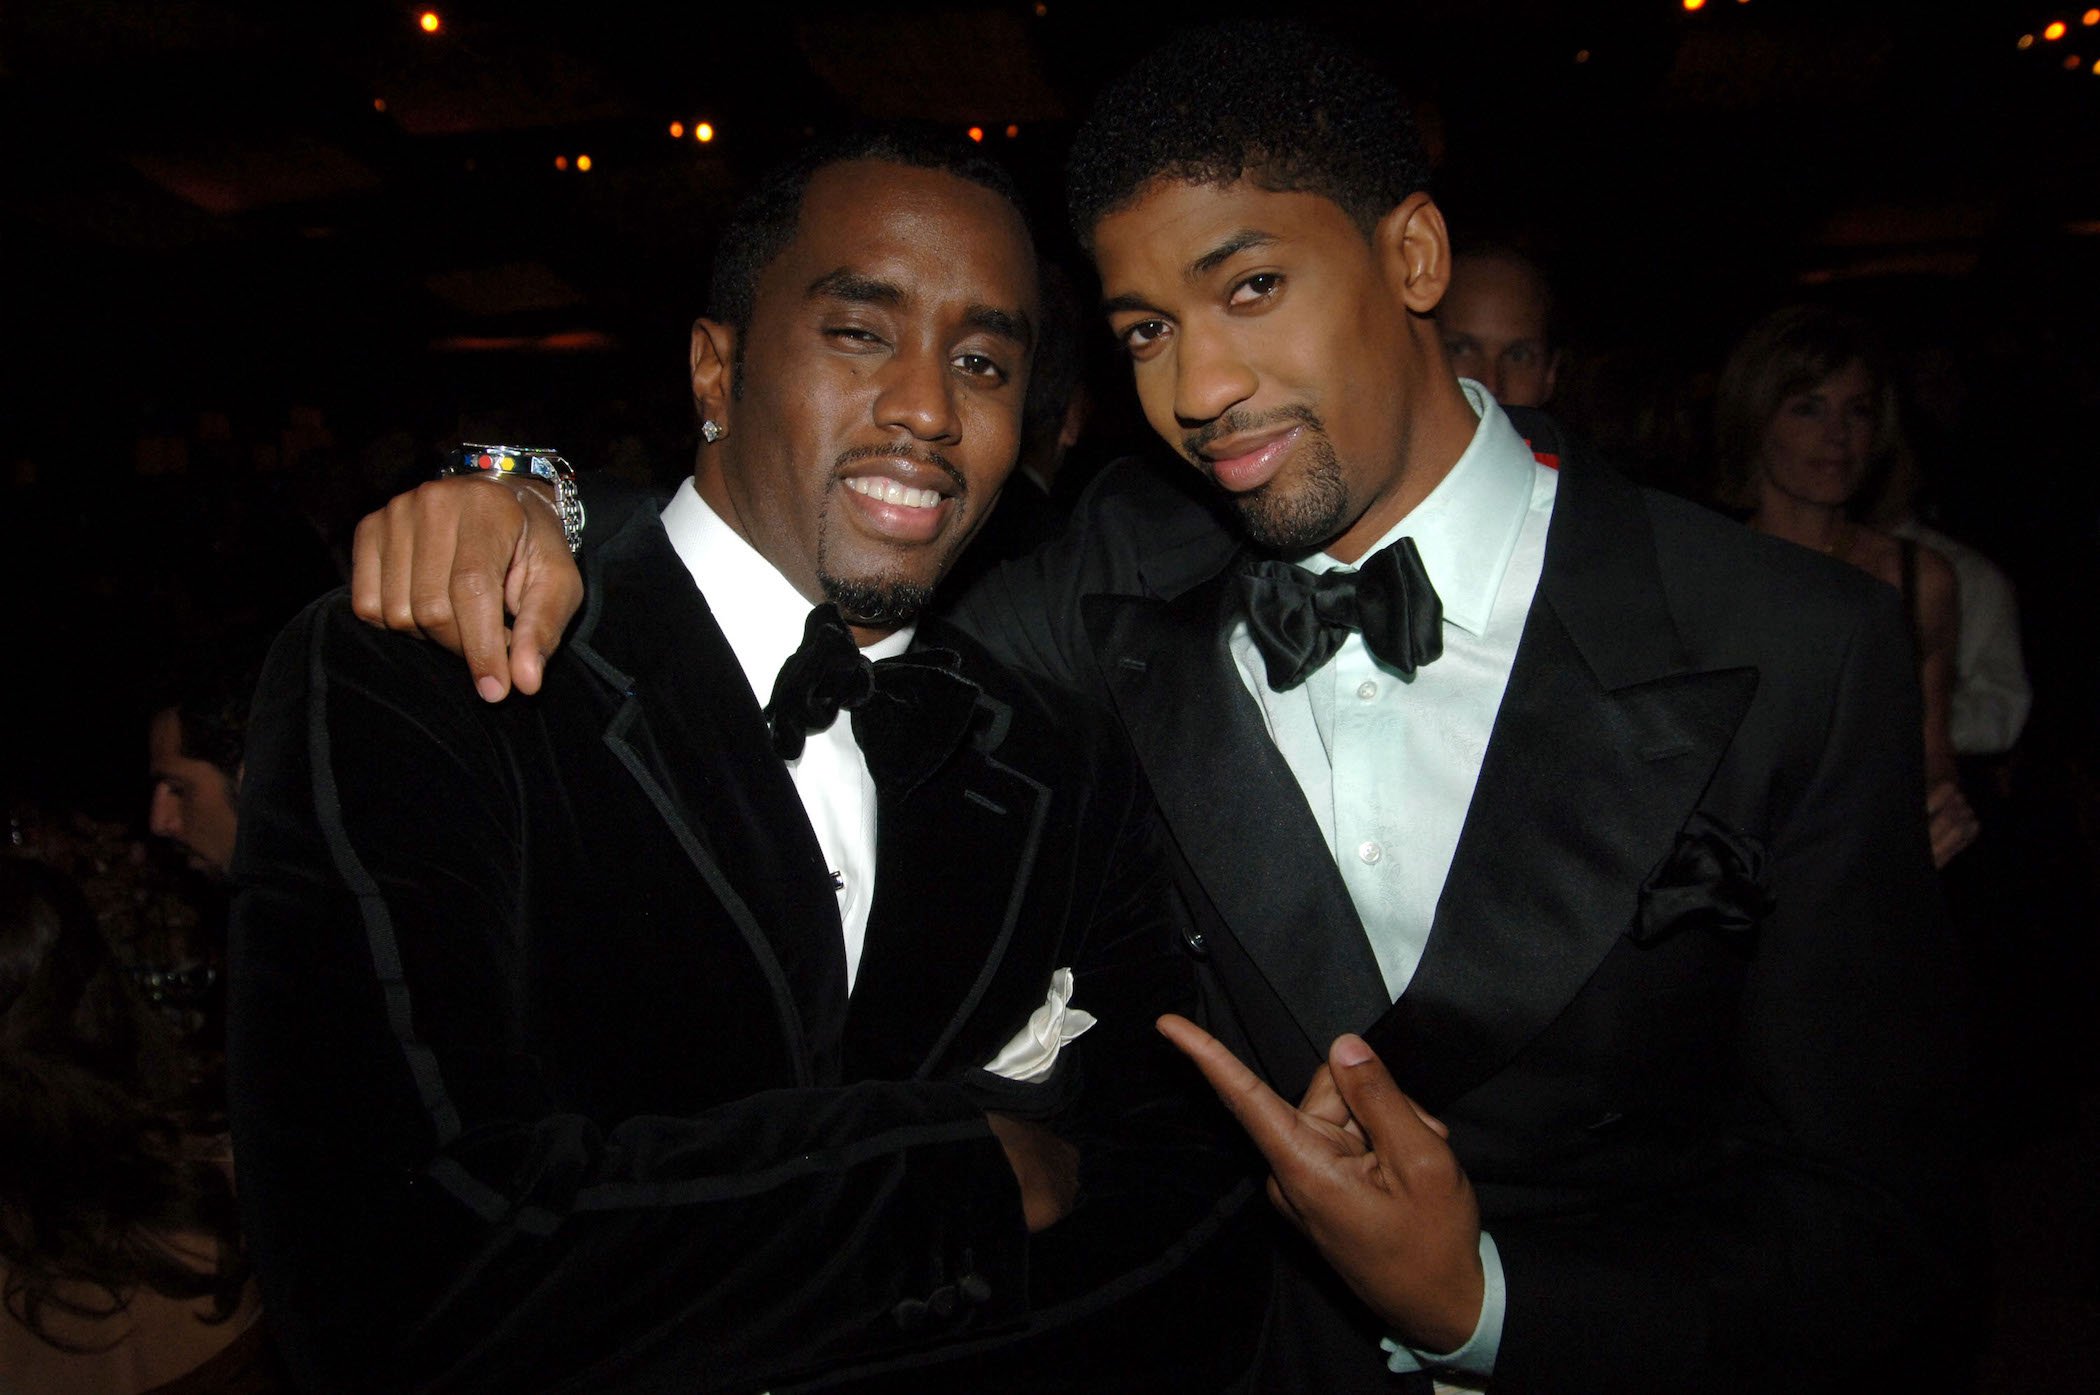 Diddy and his assistant Derek Watkins aka Fonzworth Bentley in suits at an event